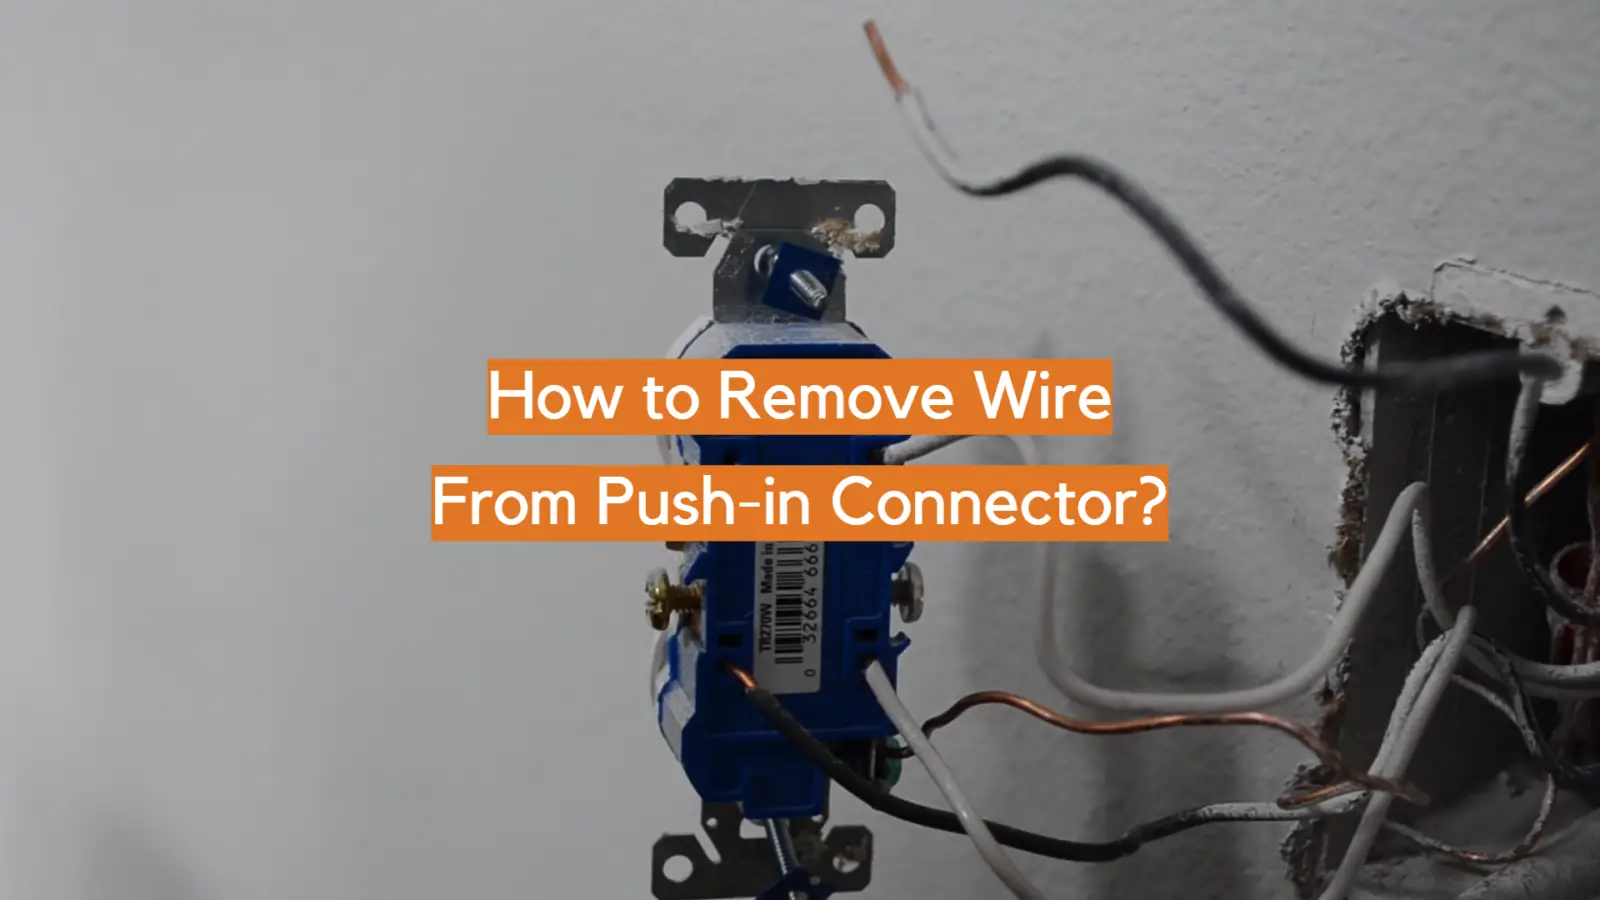 How to Remove Wire From Push-in Connector?